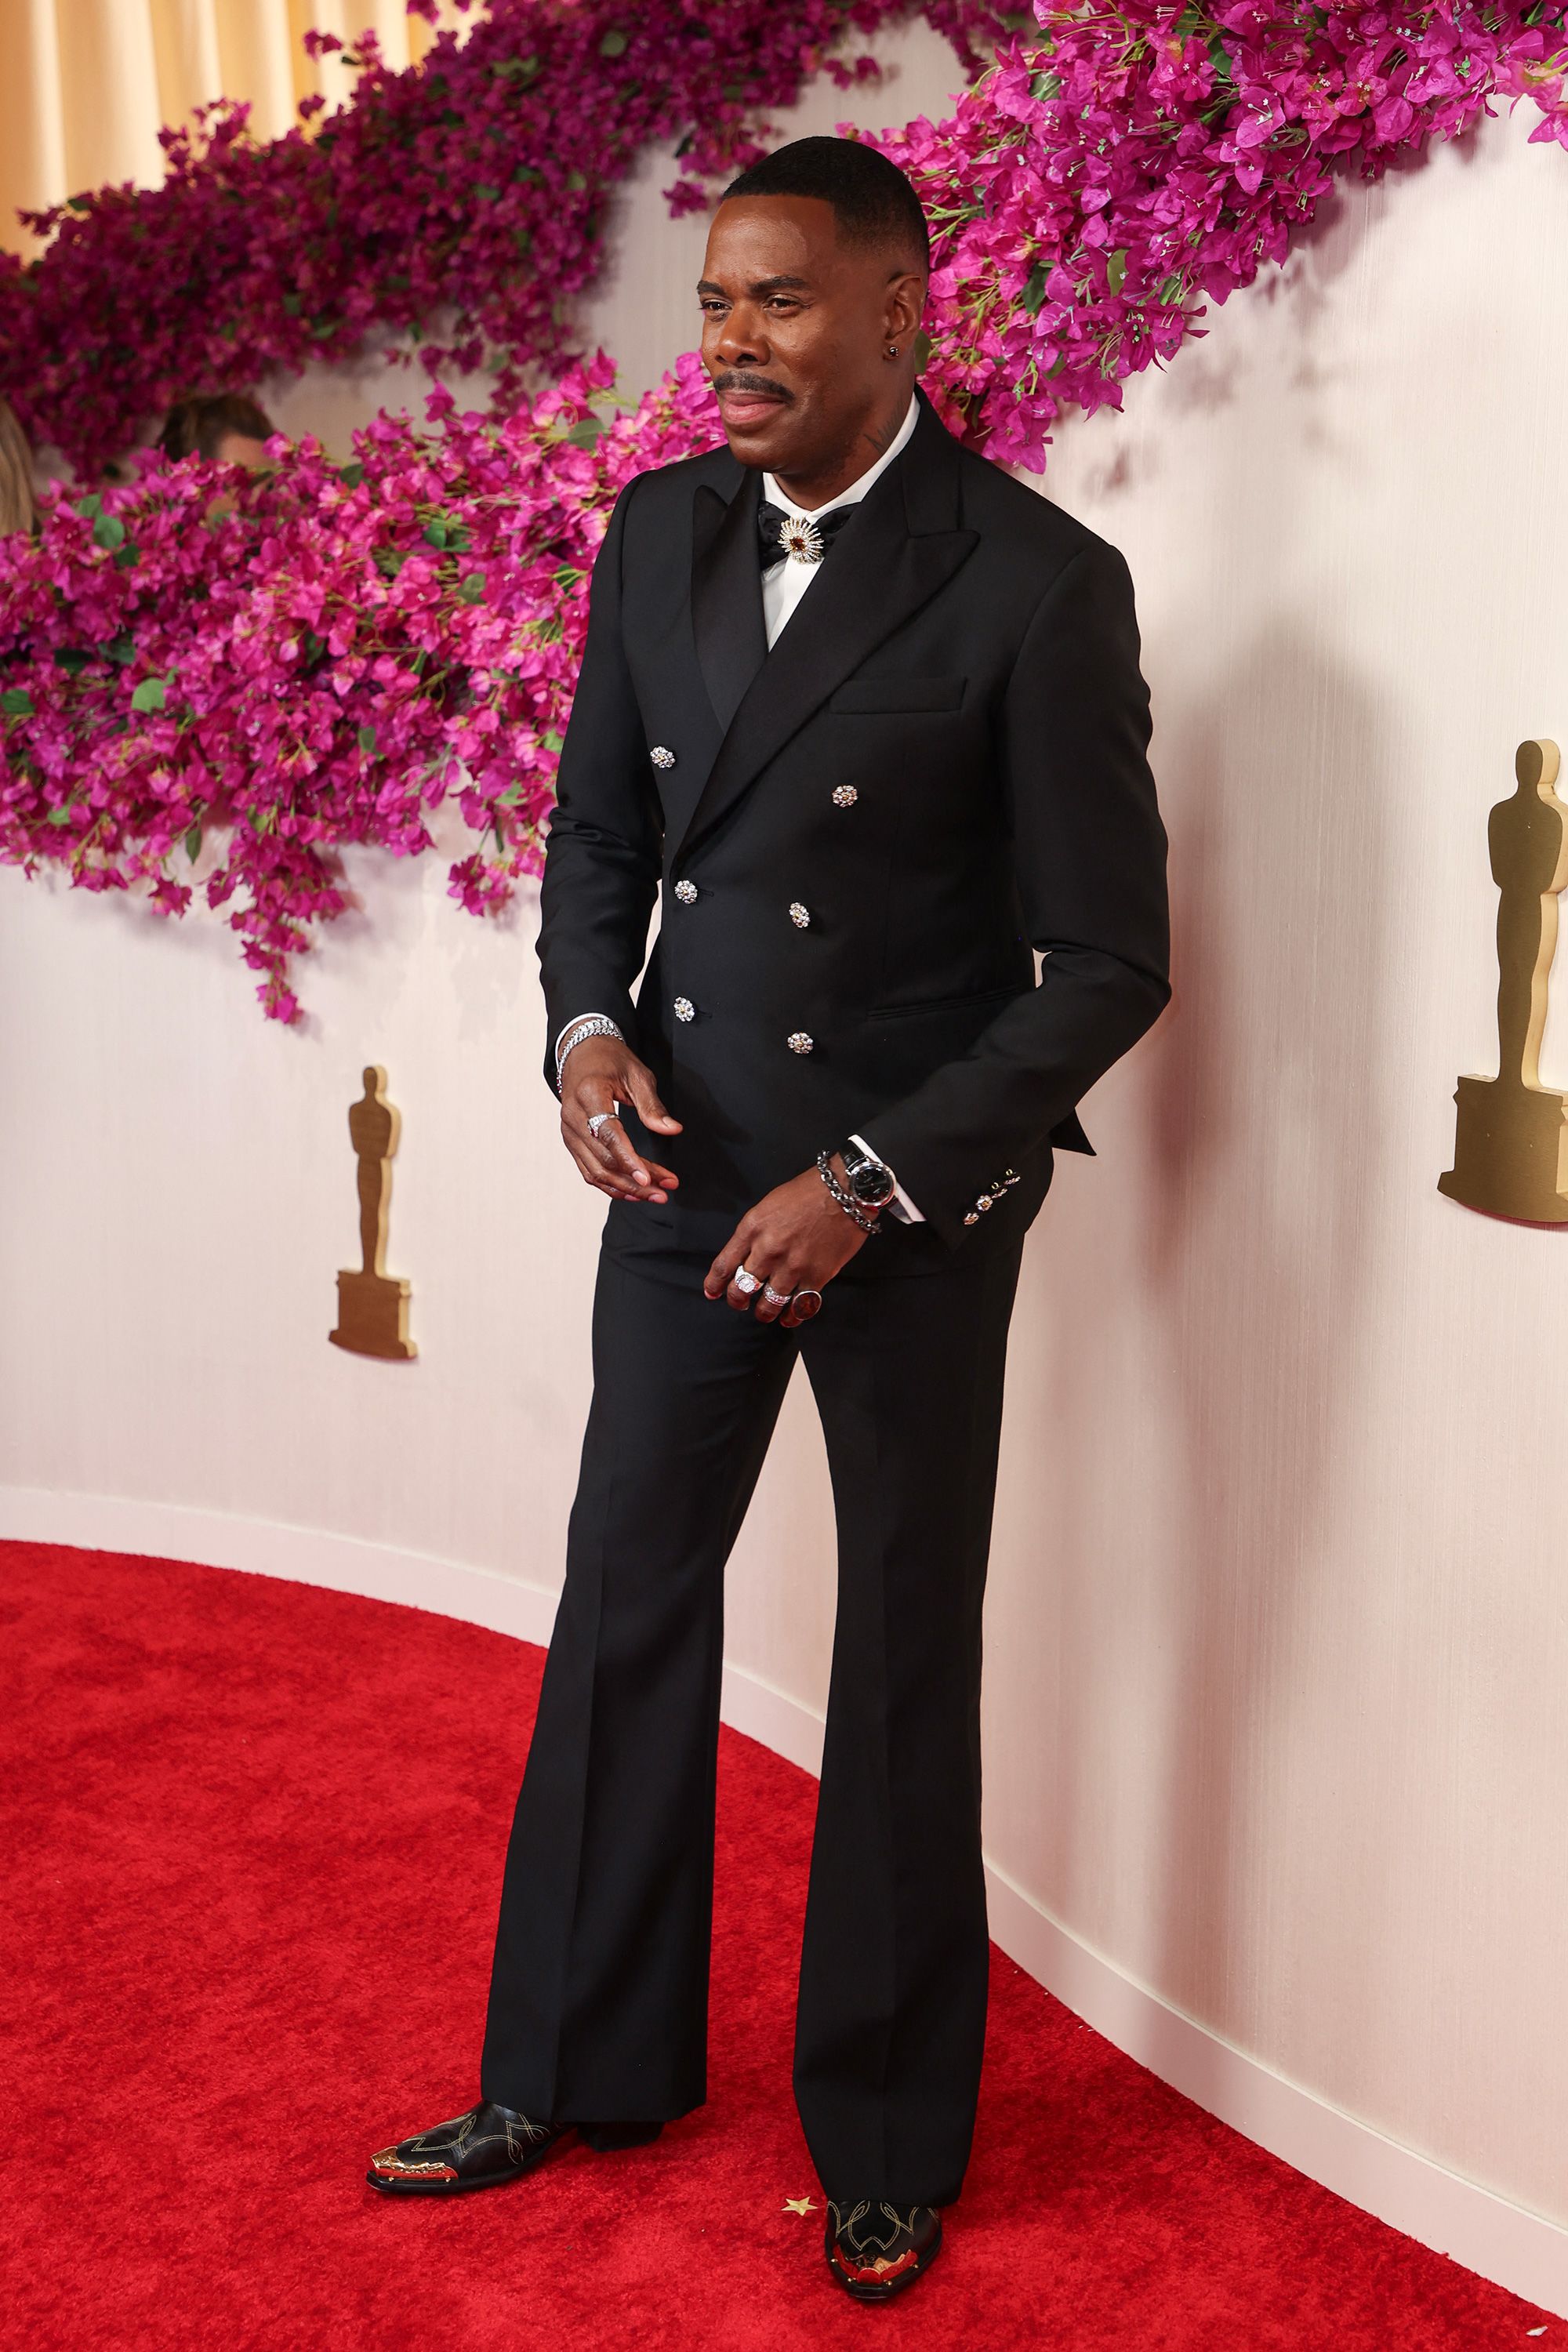 Best Actor nominee Colman Domingo wore a black double-breasted suit by Louis Vuitton with a dapper tie and David Yurman jewelry. 